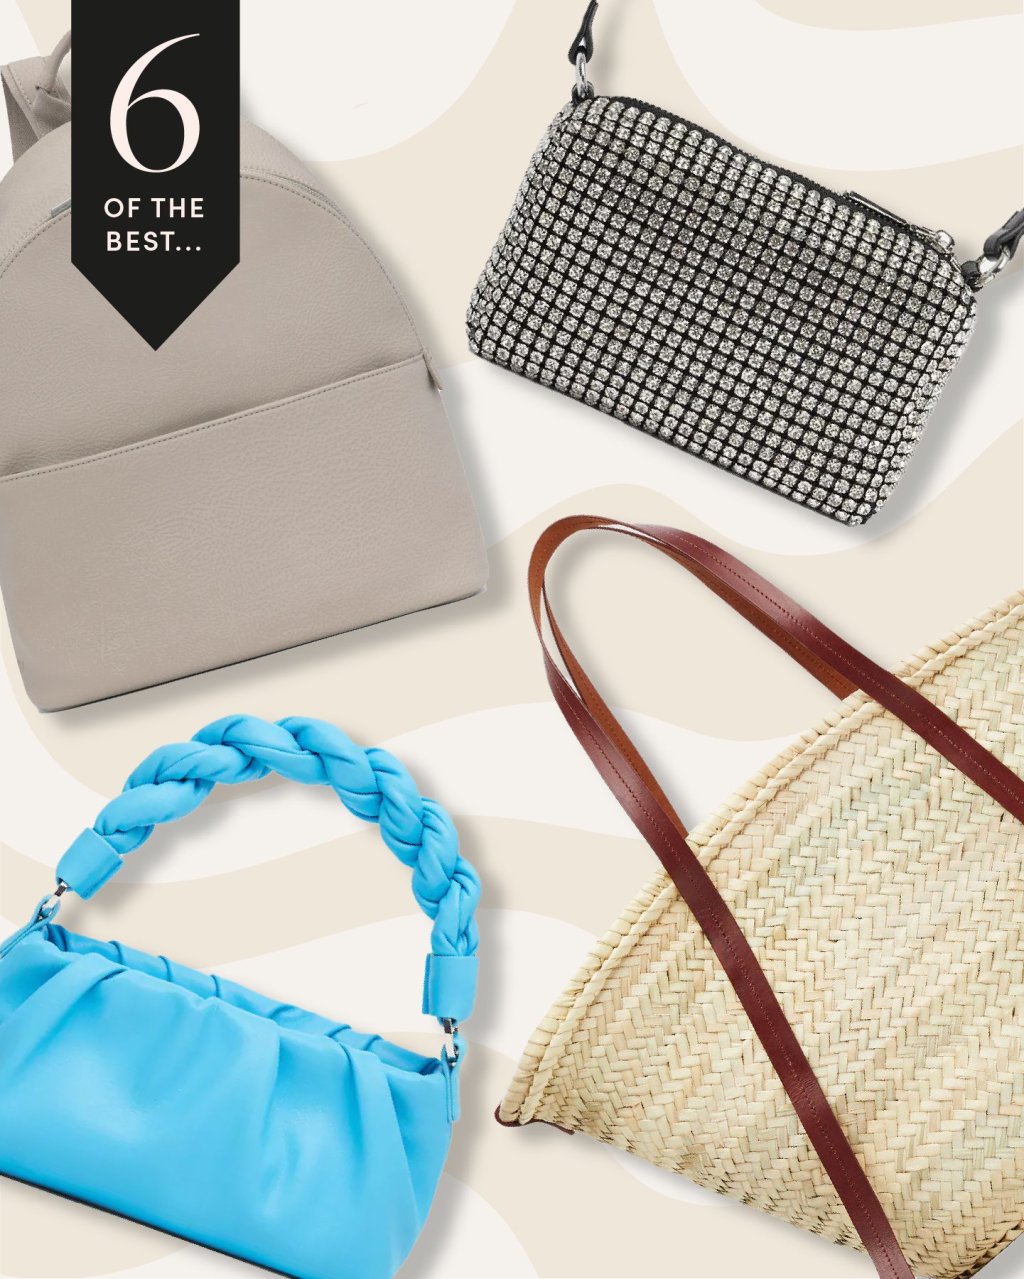 The 24 Cutest Beach Totes From Zara, H&M, and Mango